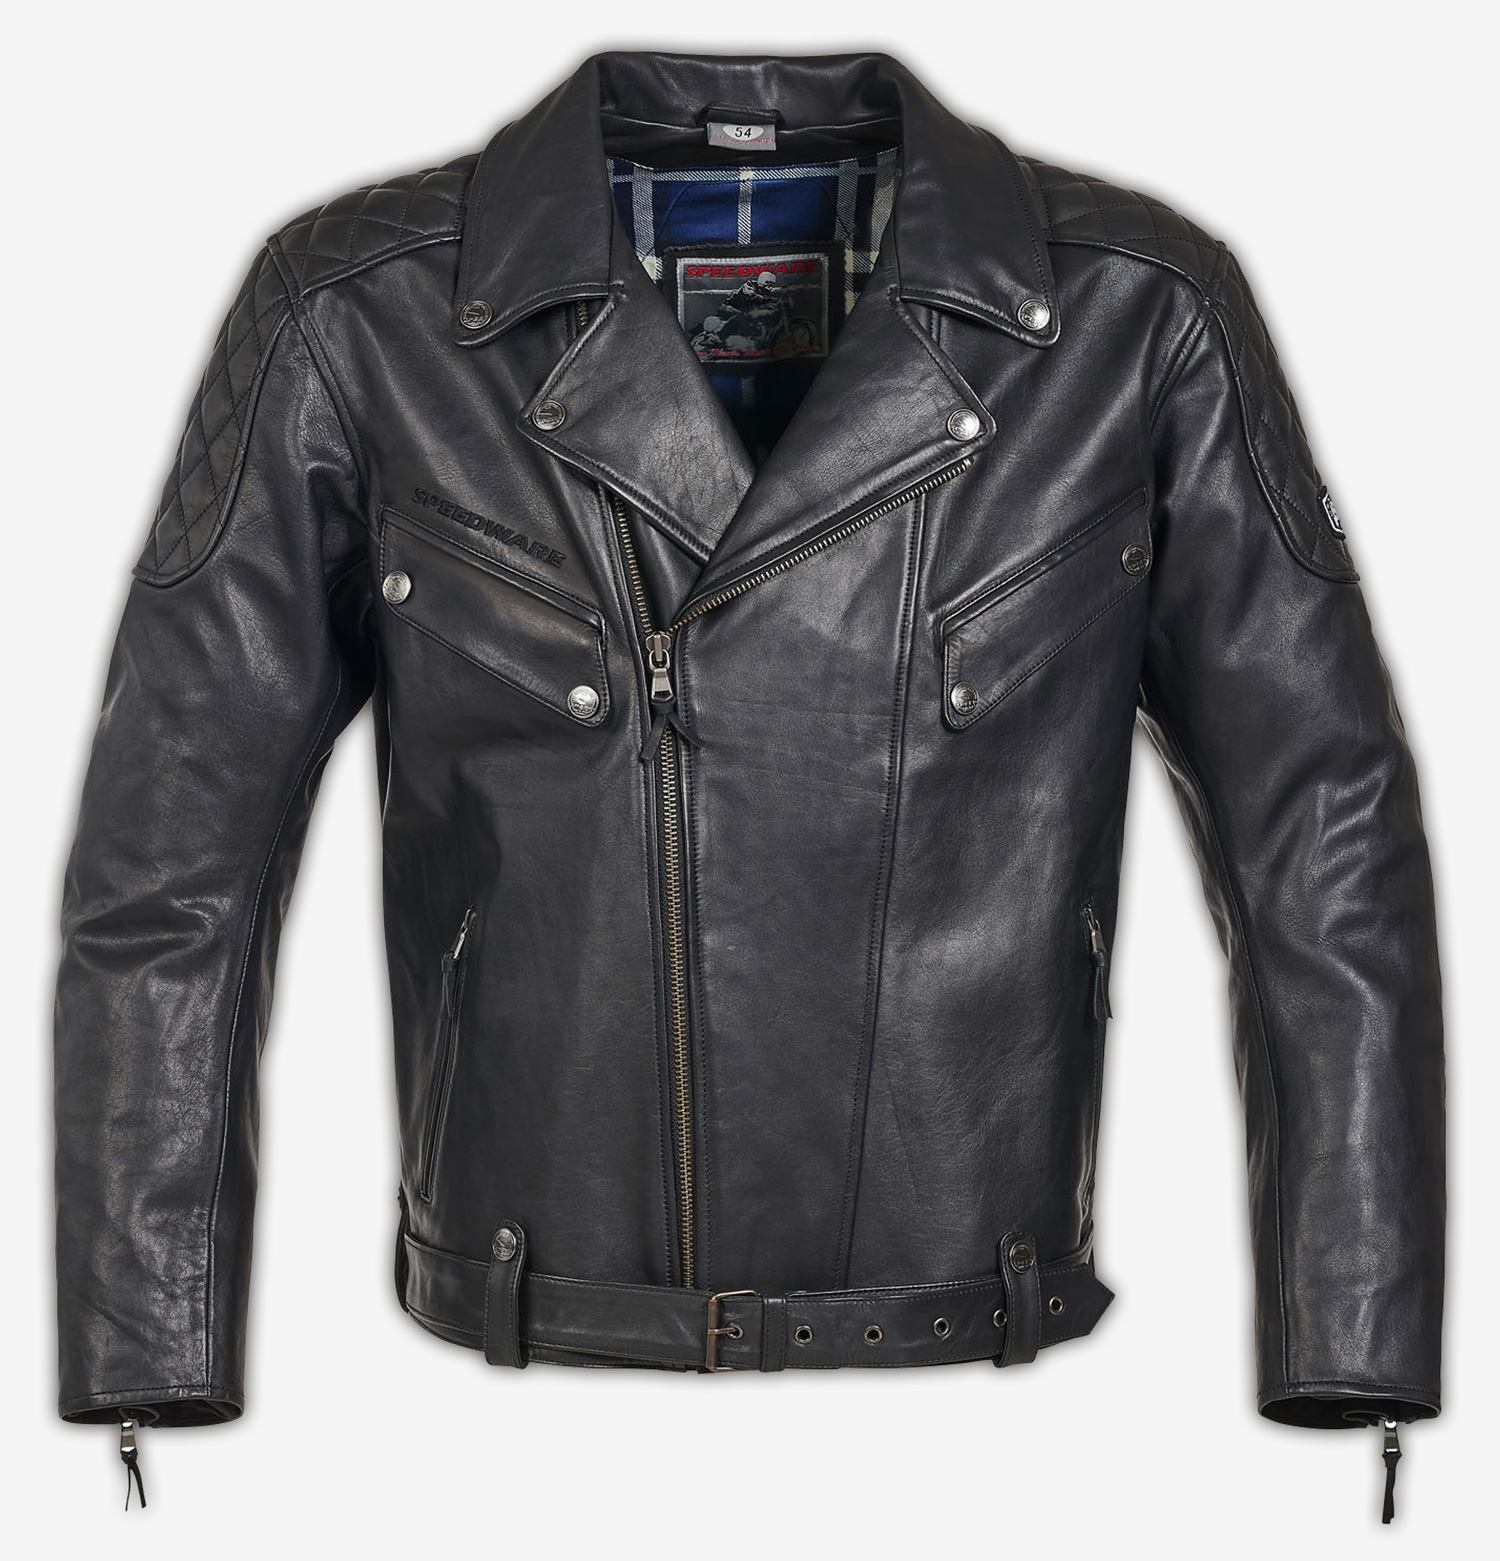 Men's Hein Gericke Leather Motorcycle Suit 2 piece small | in Oldham,  Manchester | Gumtree